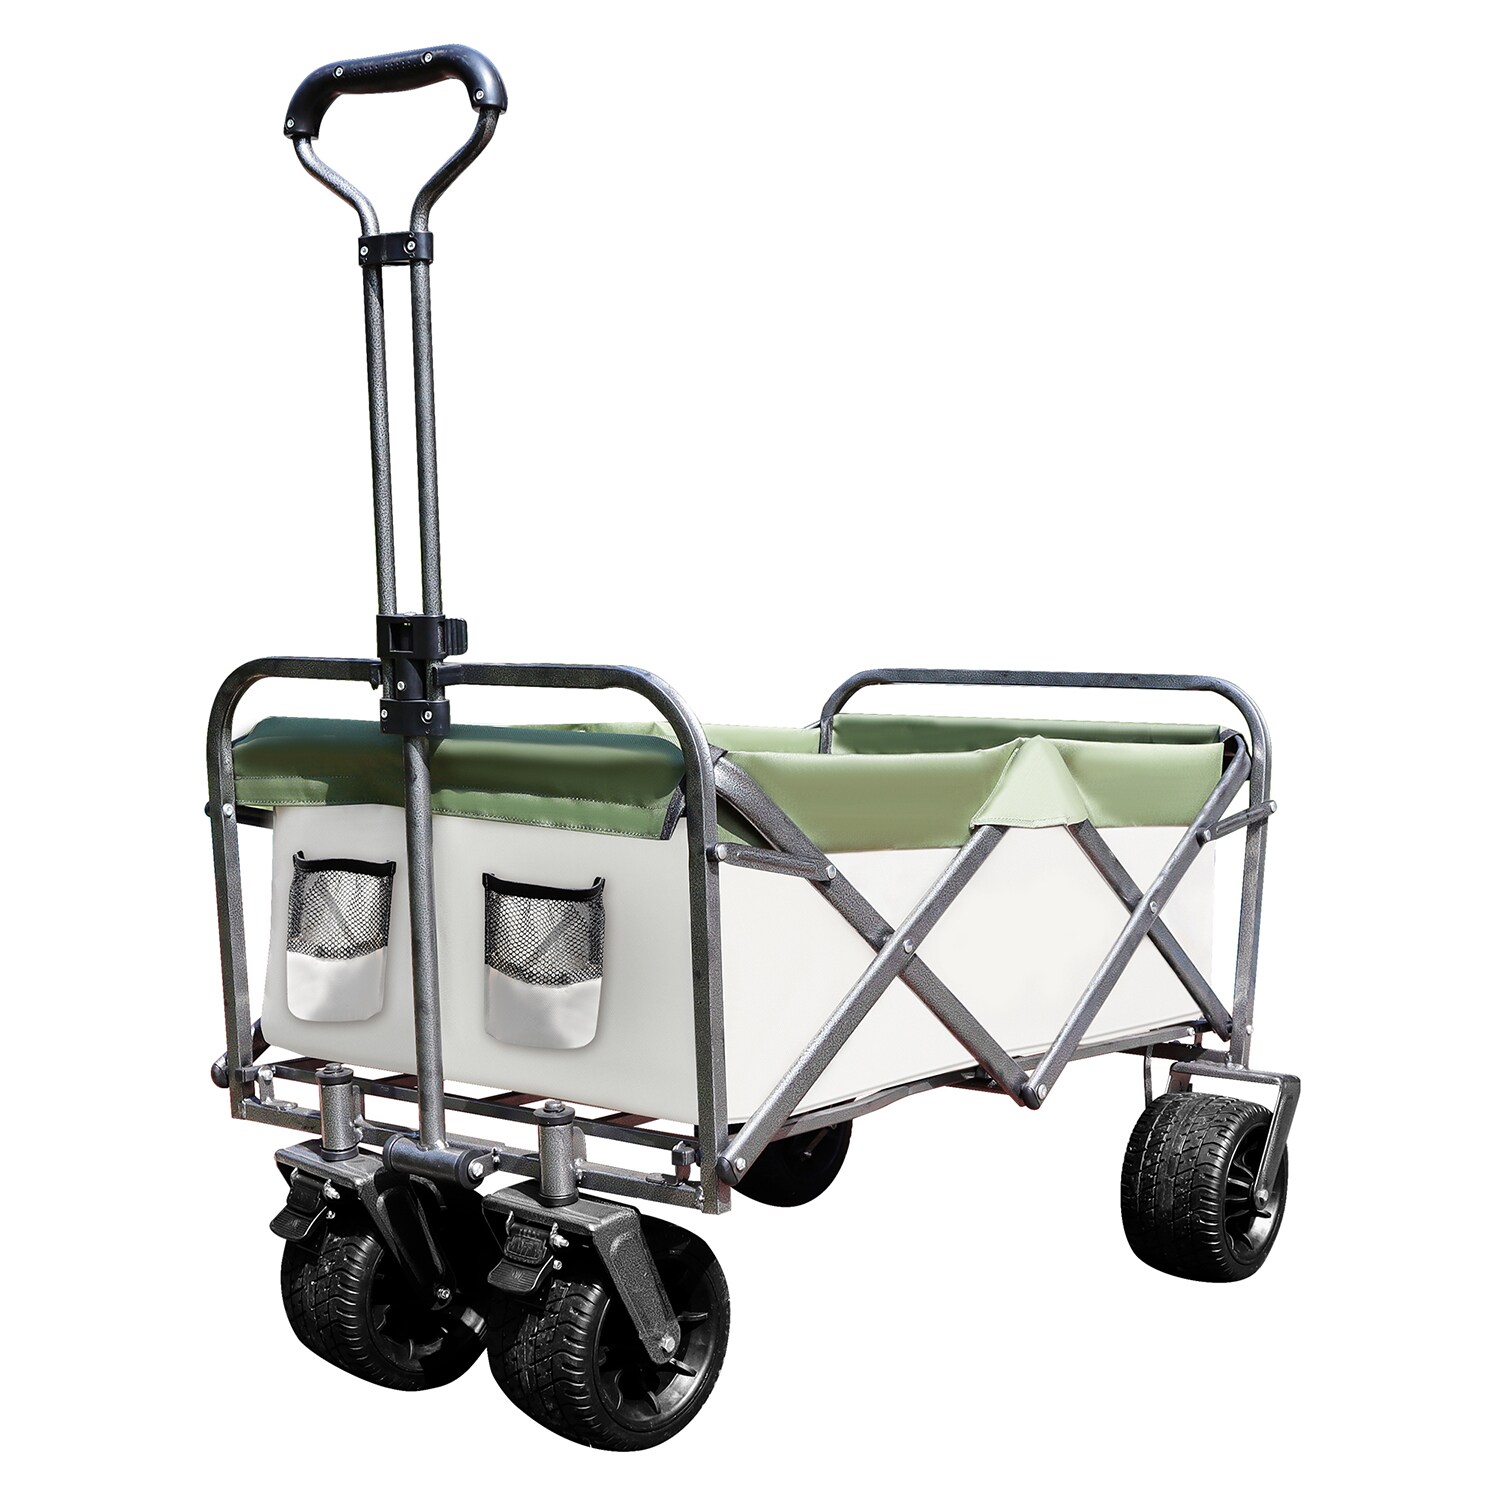  Jeremywell Folding Beach Cart with Big Balloon Wheels Loading  165lbs, Heavy-Duty All-Terrain Utility Wagon with Strong Wheels, Adjustable  Height for Sand, Outdoor Camping : Patio, Lawn & Garden